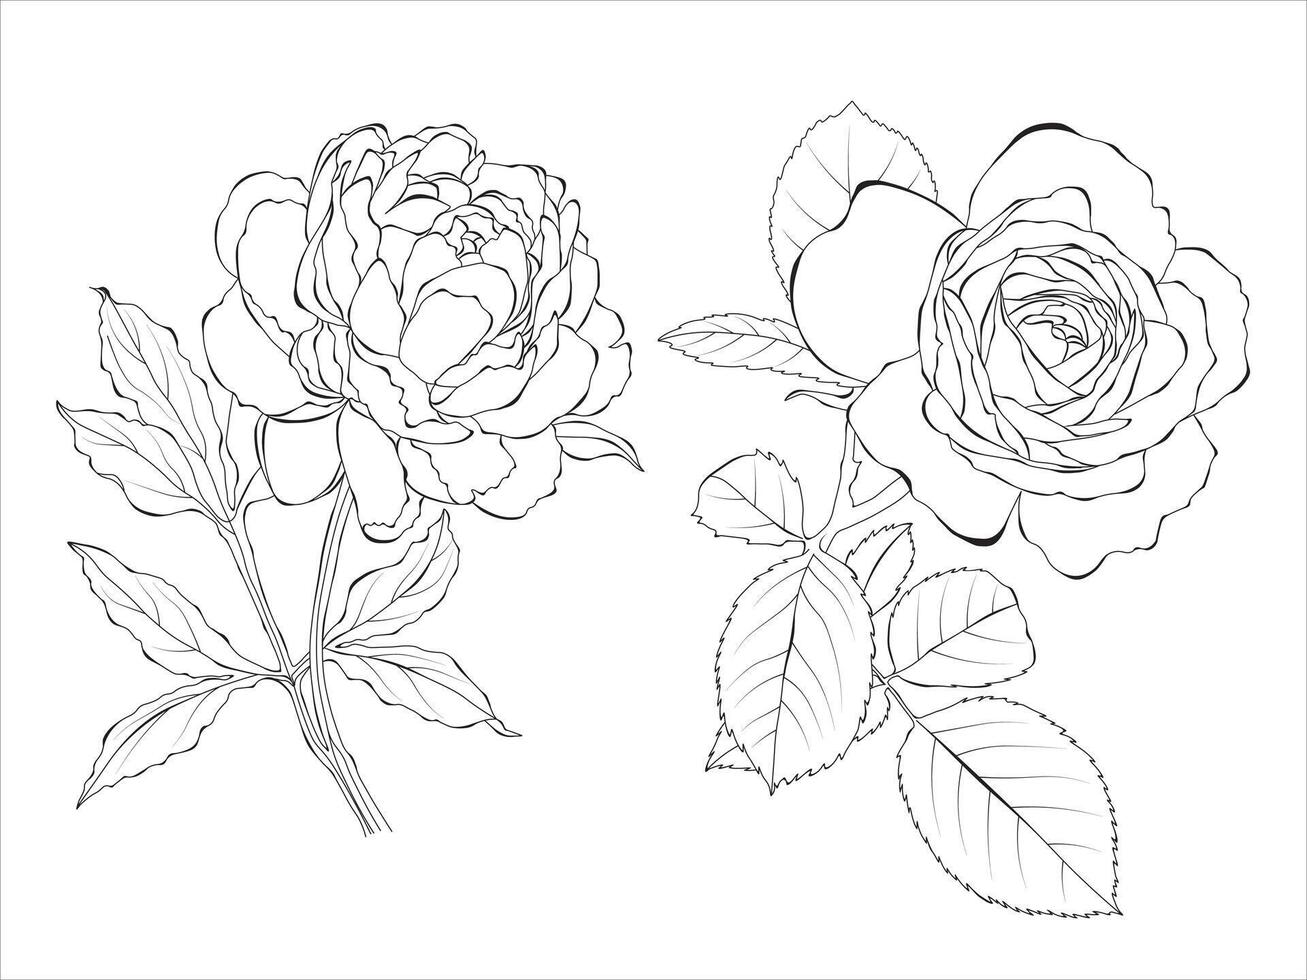 Peony and rose line art, outline Illustration. Flowers outline isolated on white background. Hand painted line art botanical illustration. vector